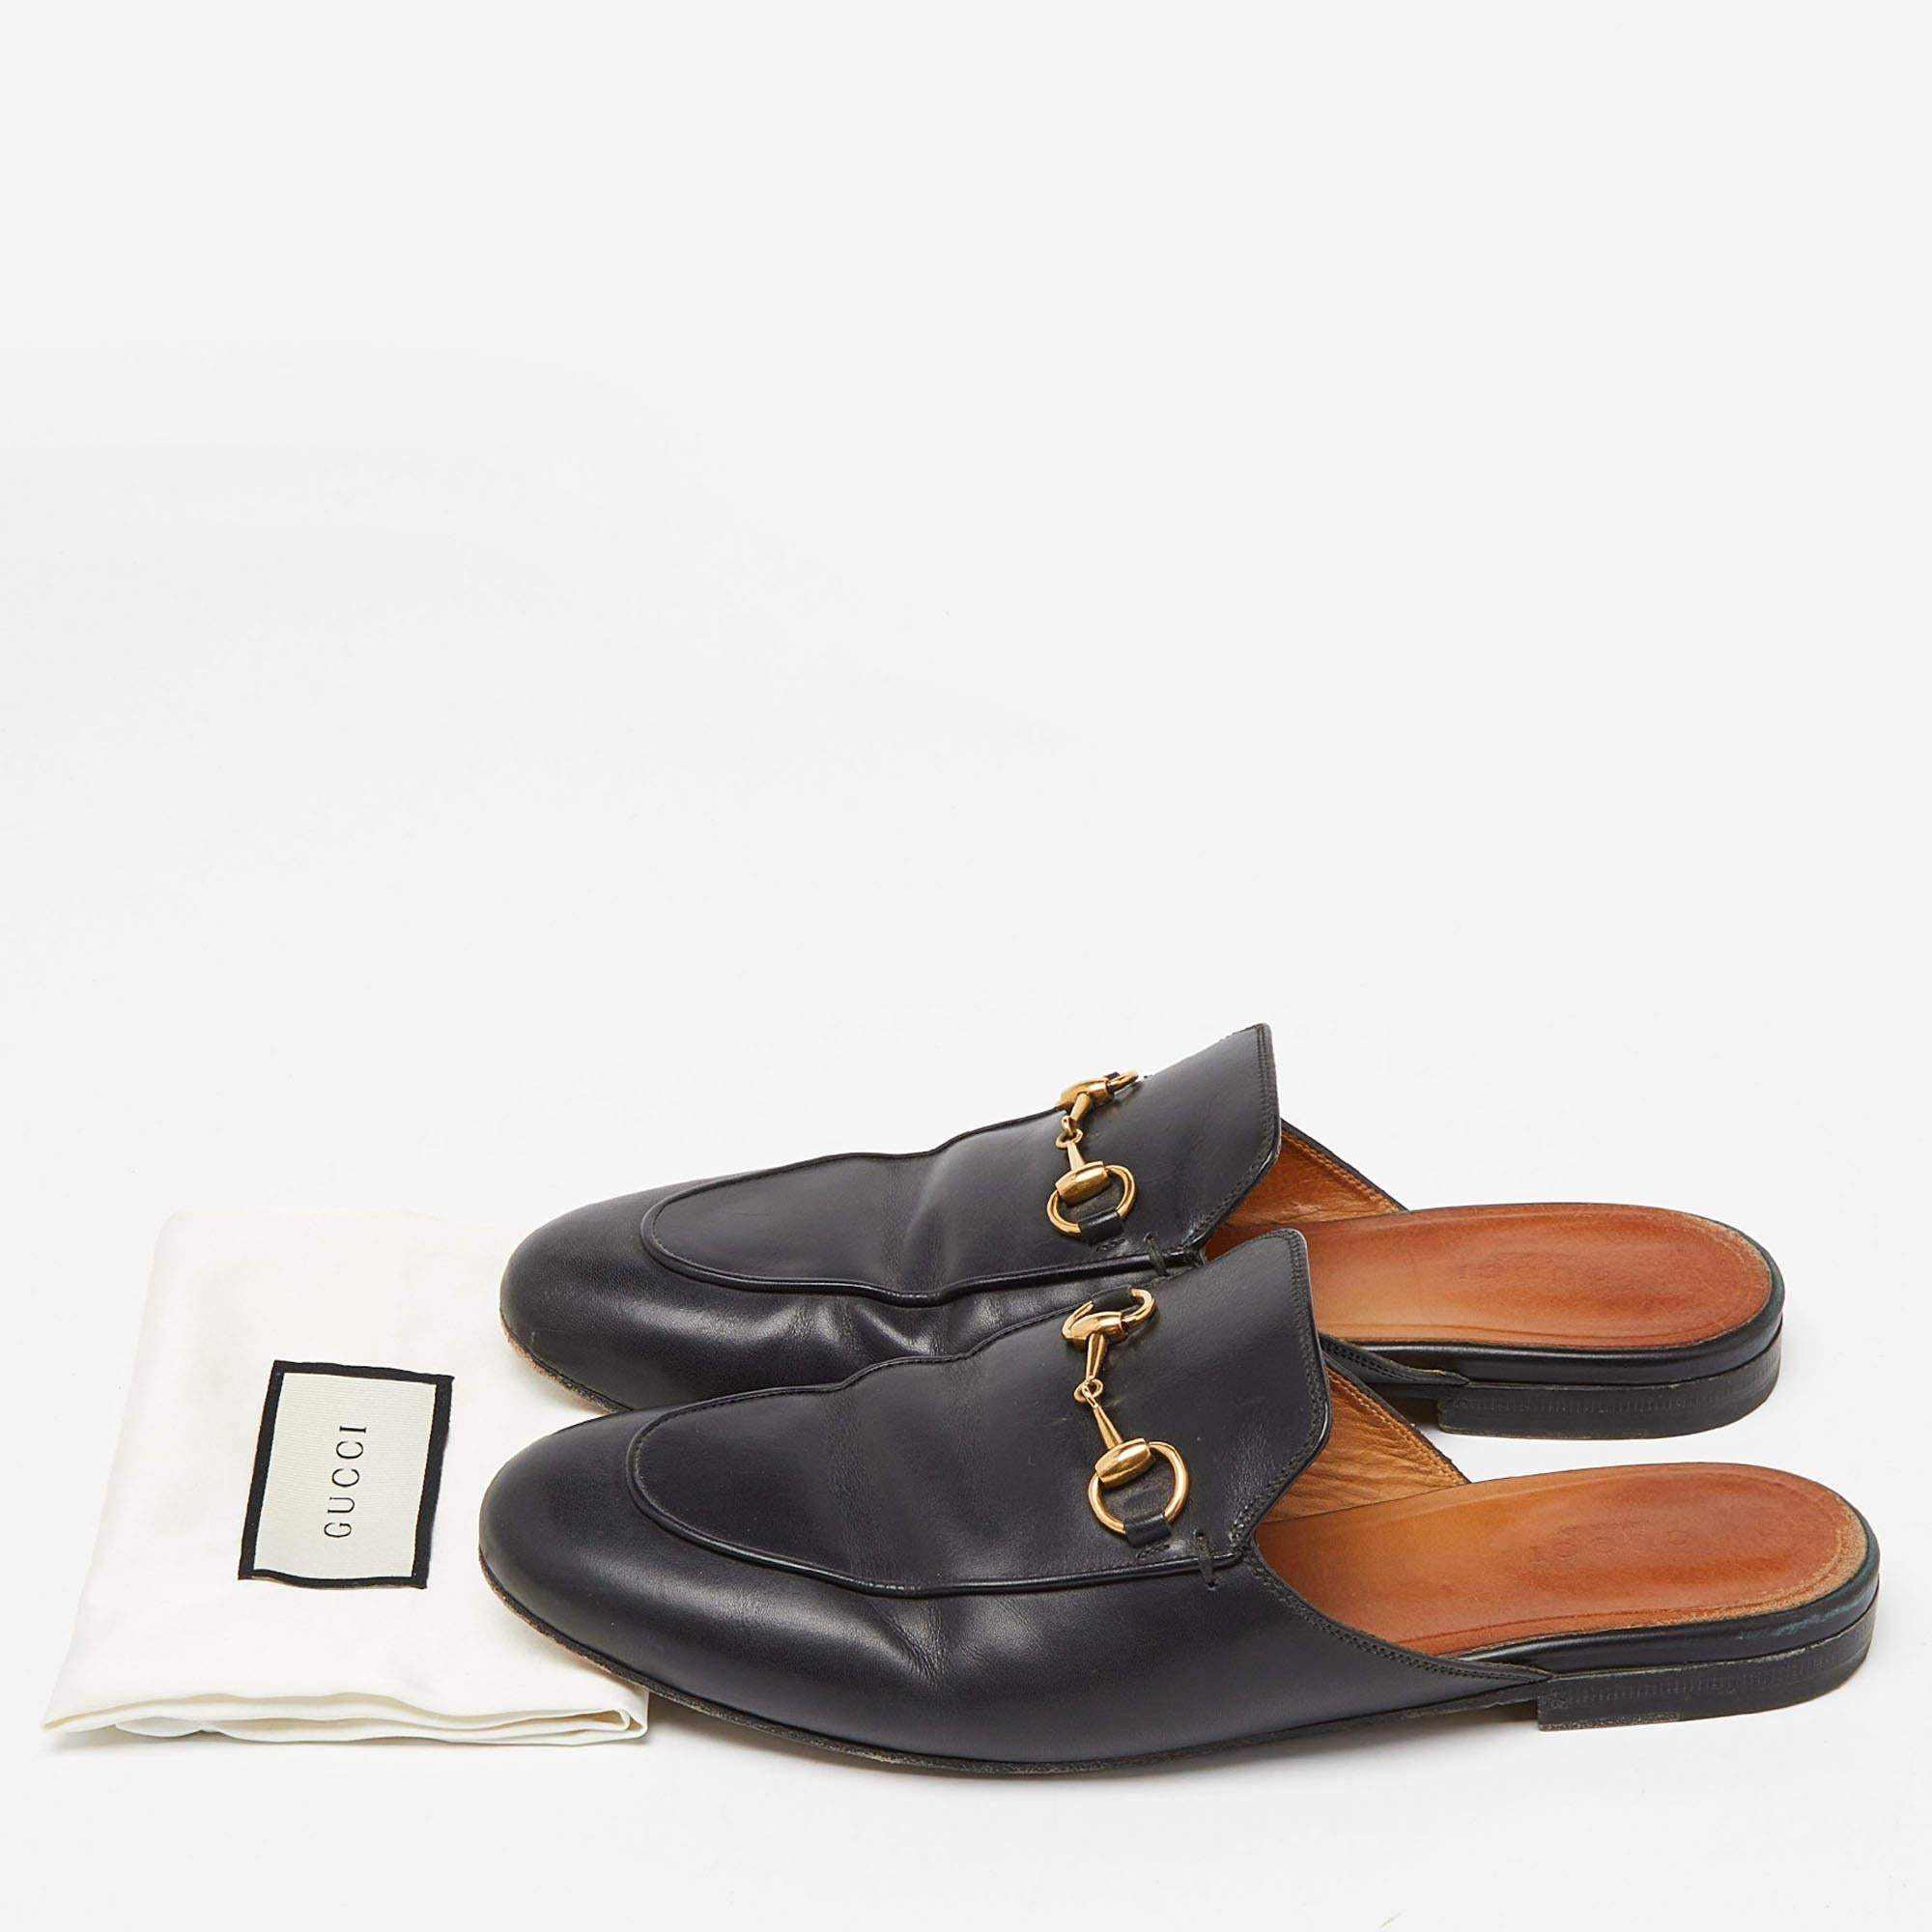 Gucci Black Leather Princetown Mules Size 40 2